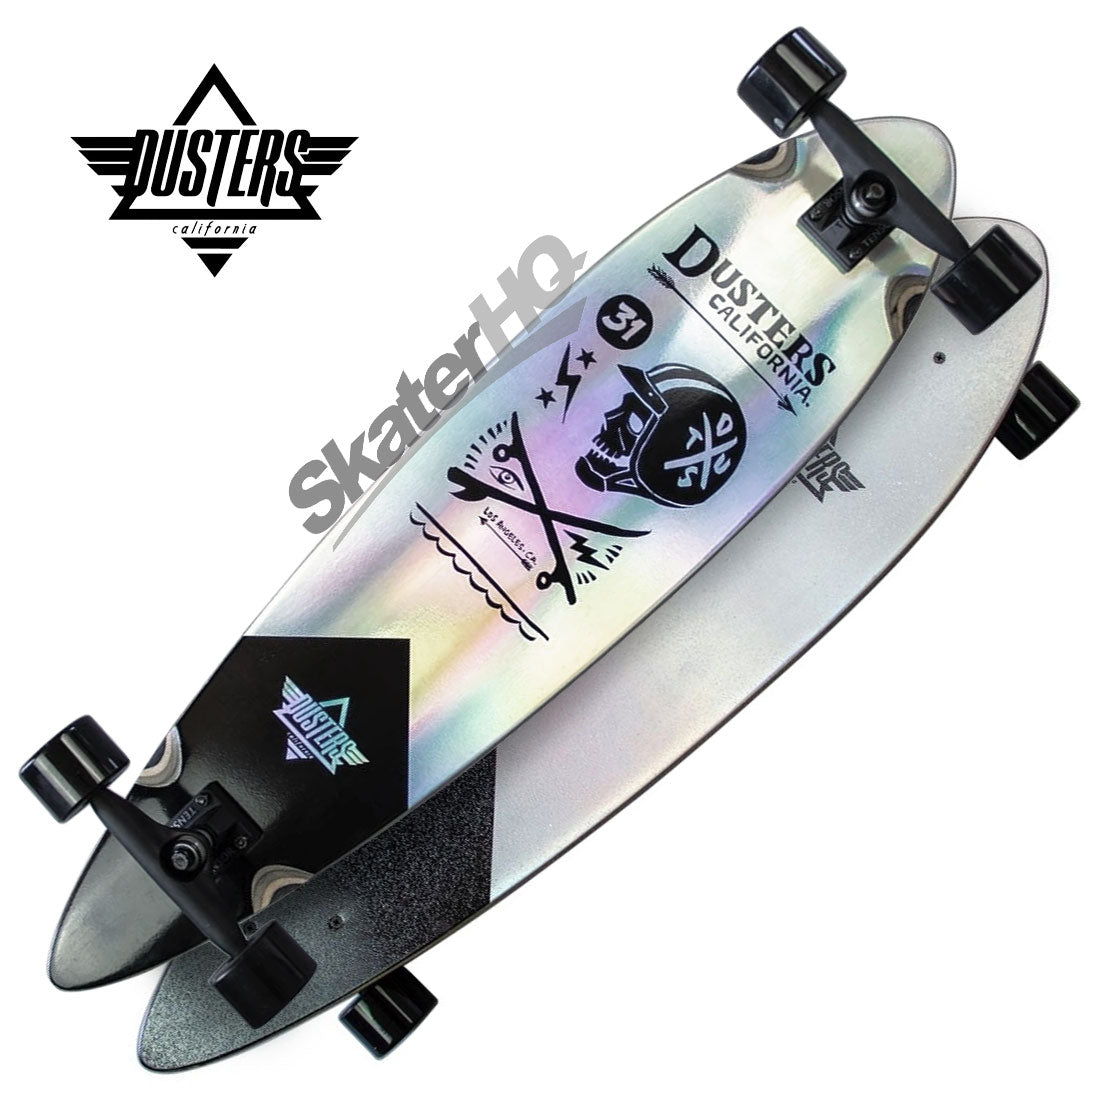 Dusters Moto Cosmic 37 Pintail Complete - Holographic Skateboard Completes Longboards